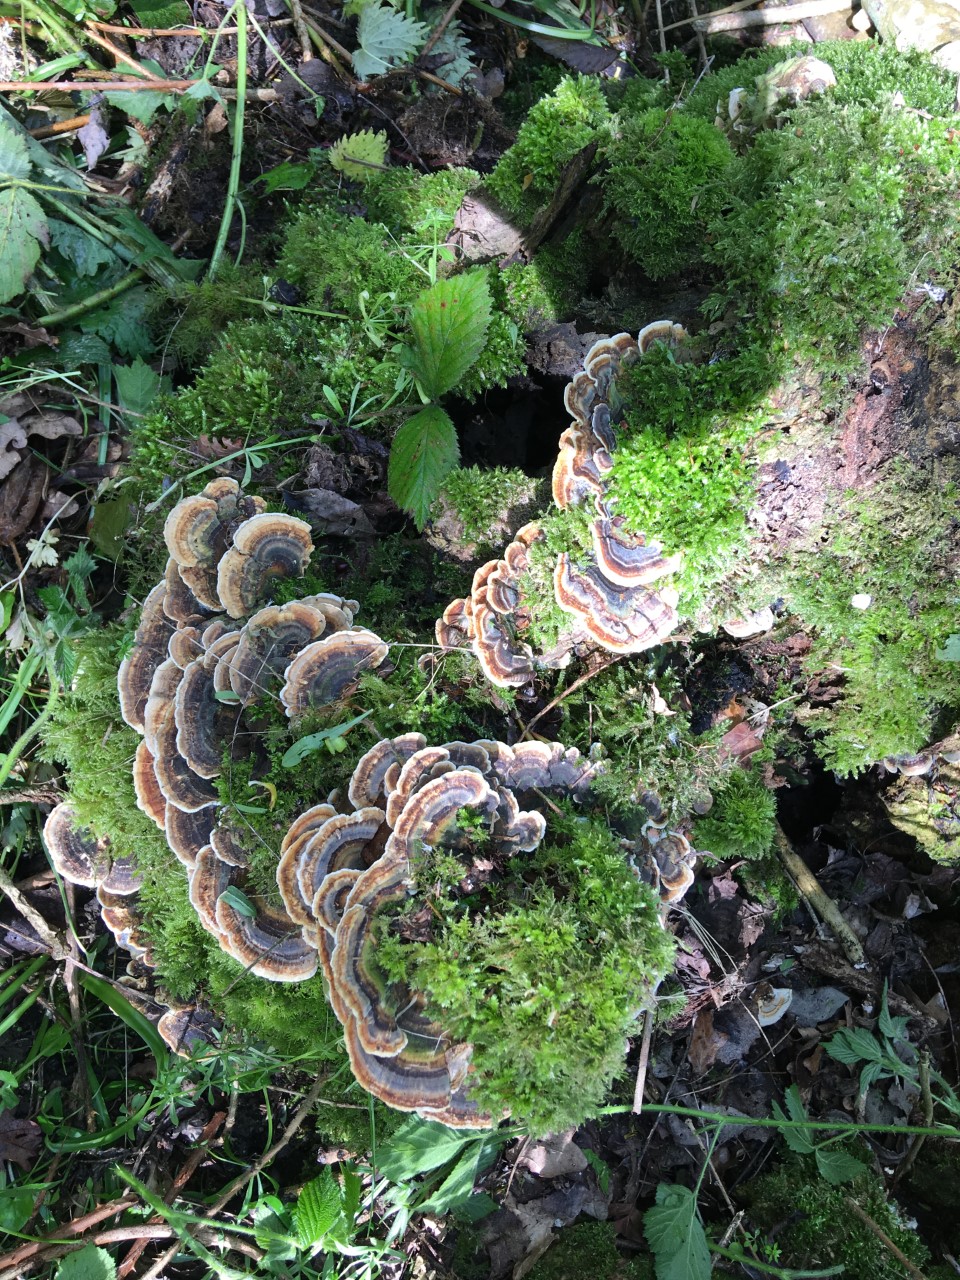 Many zoned polypore fungus in the wood.